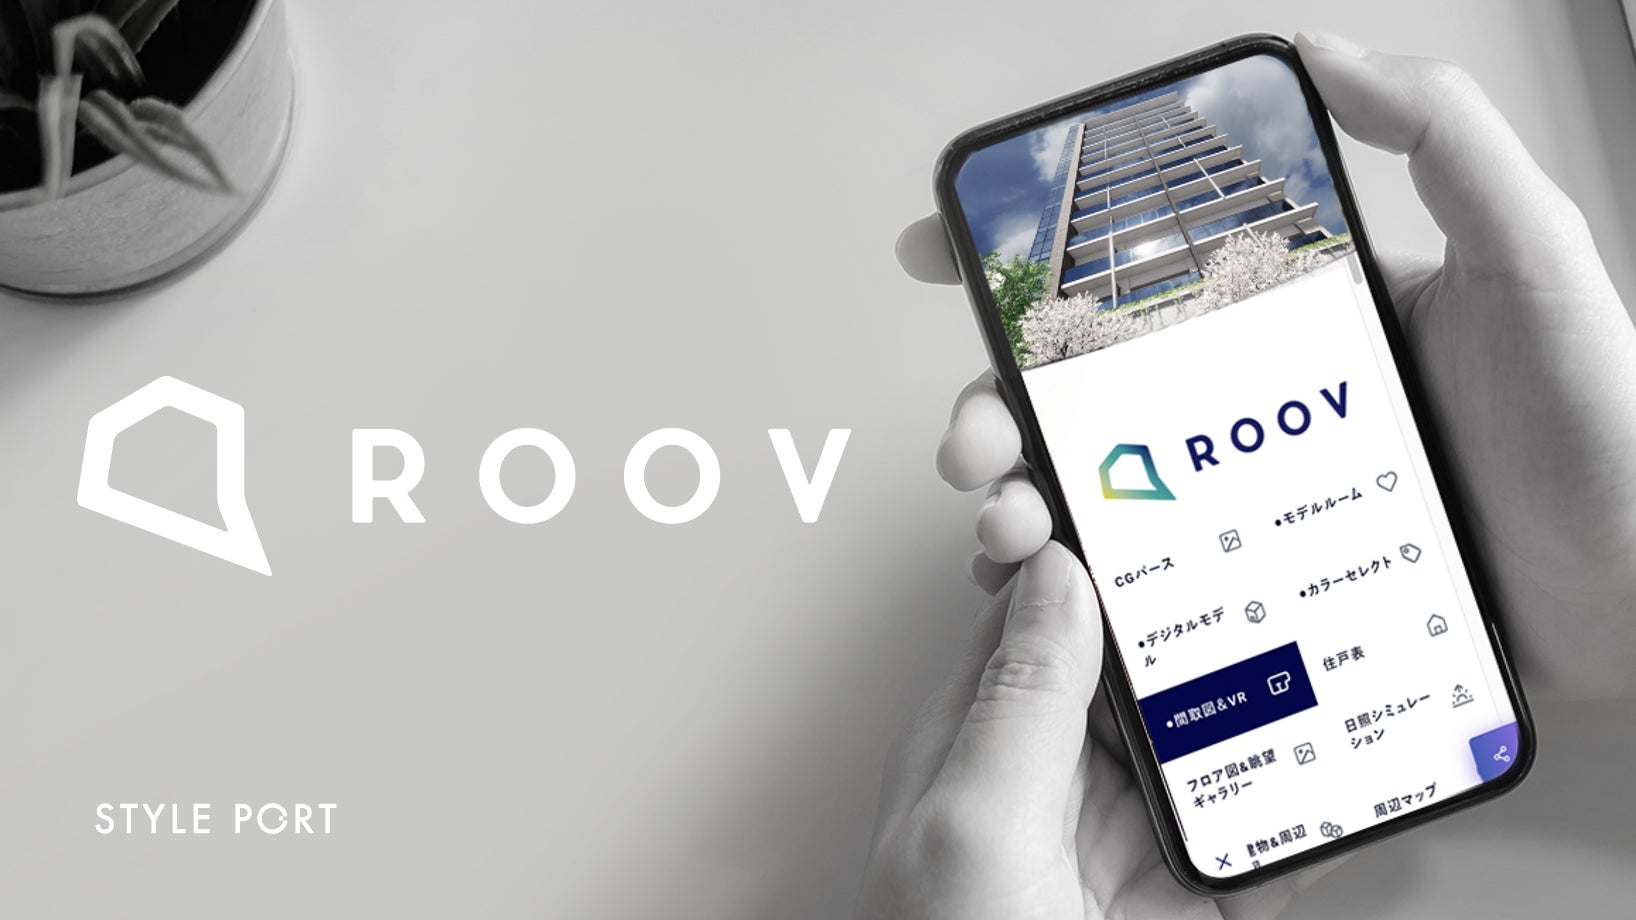 3Dコミュニケーションプラットフォーム『ROOV』のスタイルポート、『PropTech&ConTech Startup Conference 2022』にて「BEST OF PCSC 2022」を受賞のサブ画像3